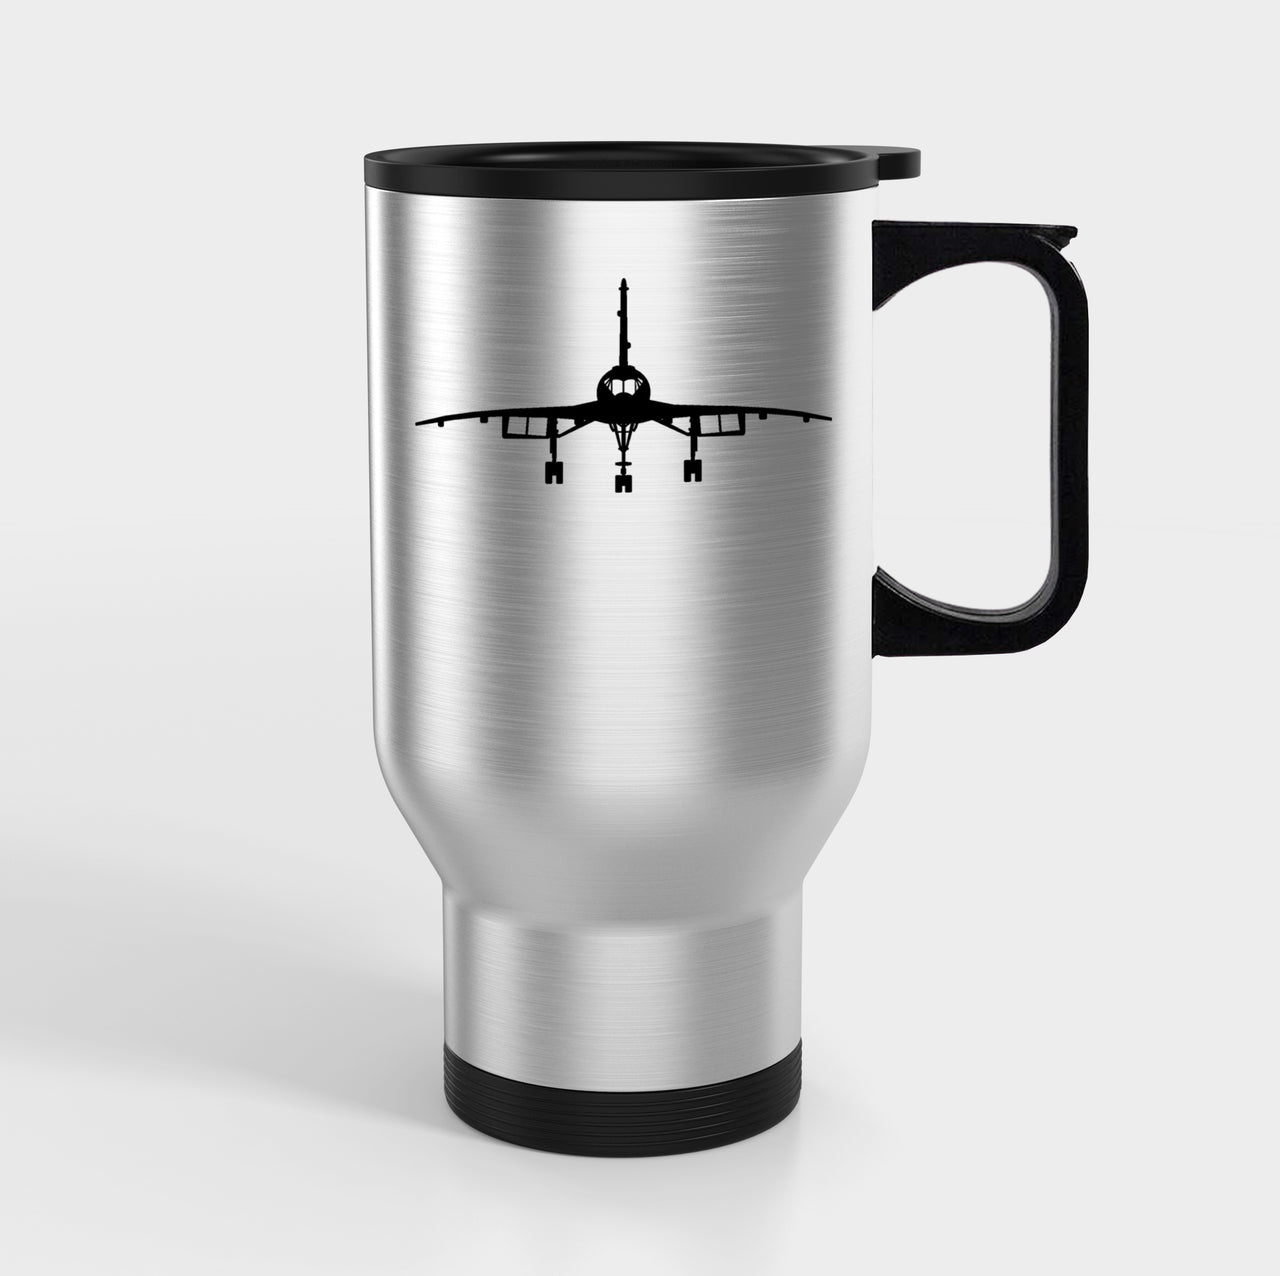 Concorde Silhouette Designed Travel Mugs (With Holder)